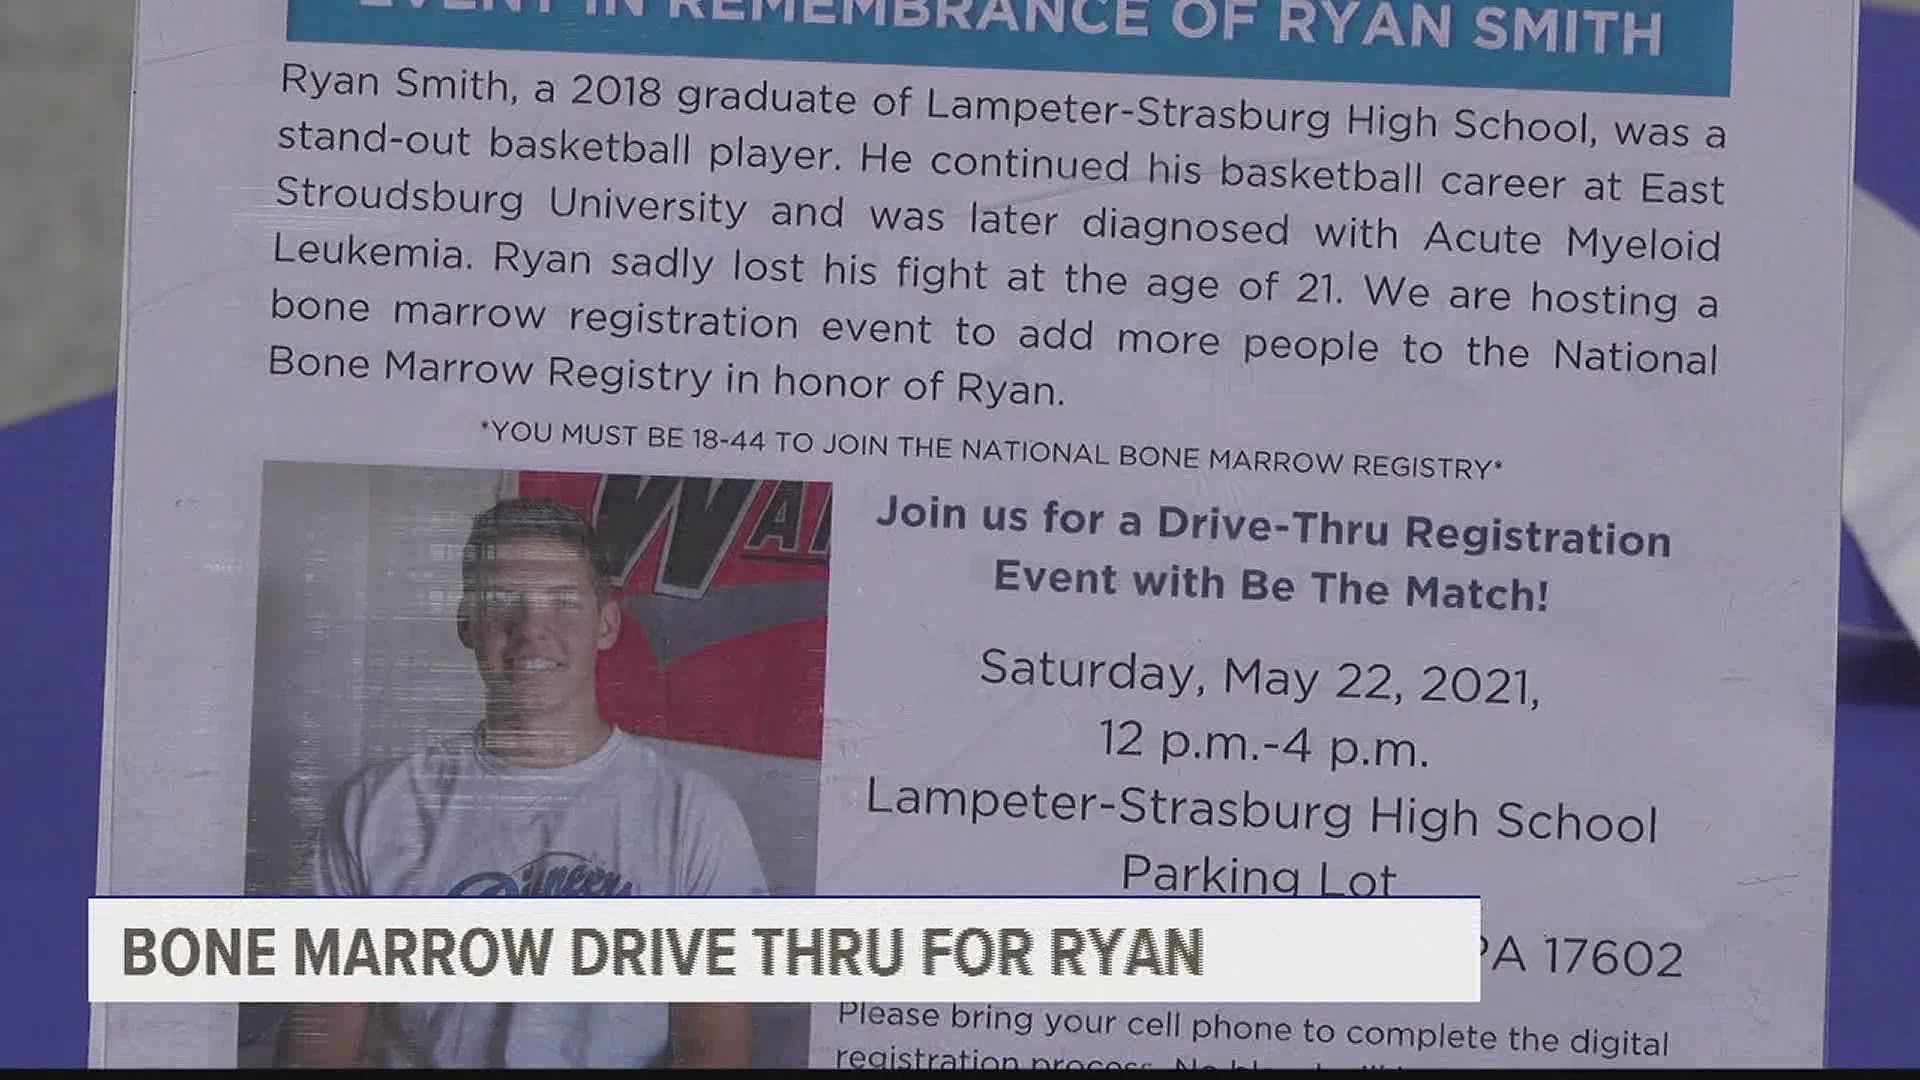 The event encourages people ages 18 to 44 to join the national bone marrow donor registry.